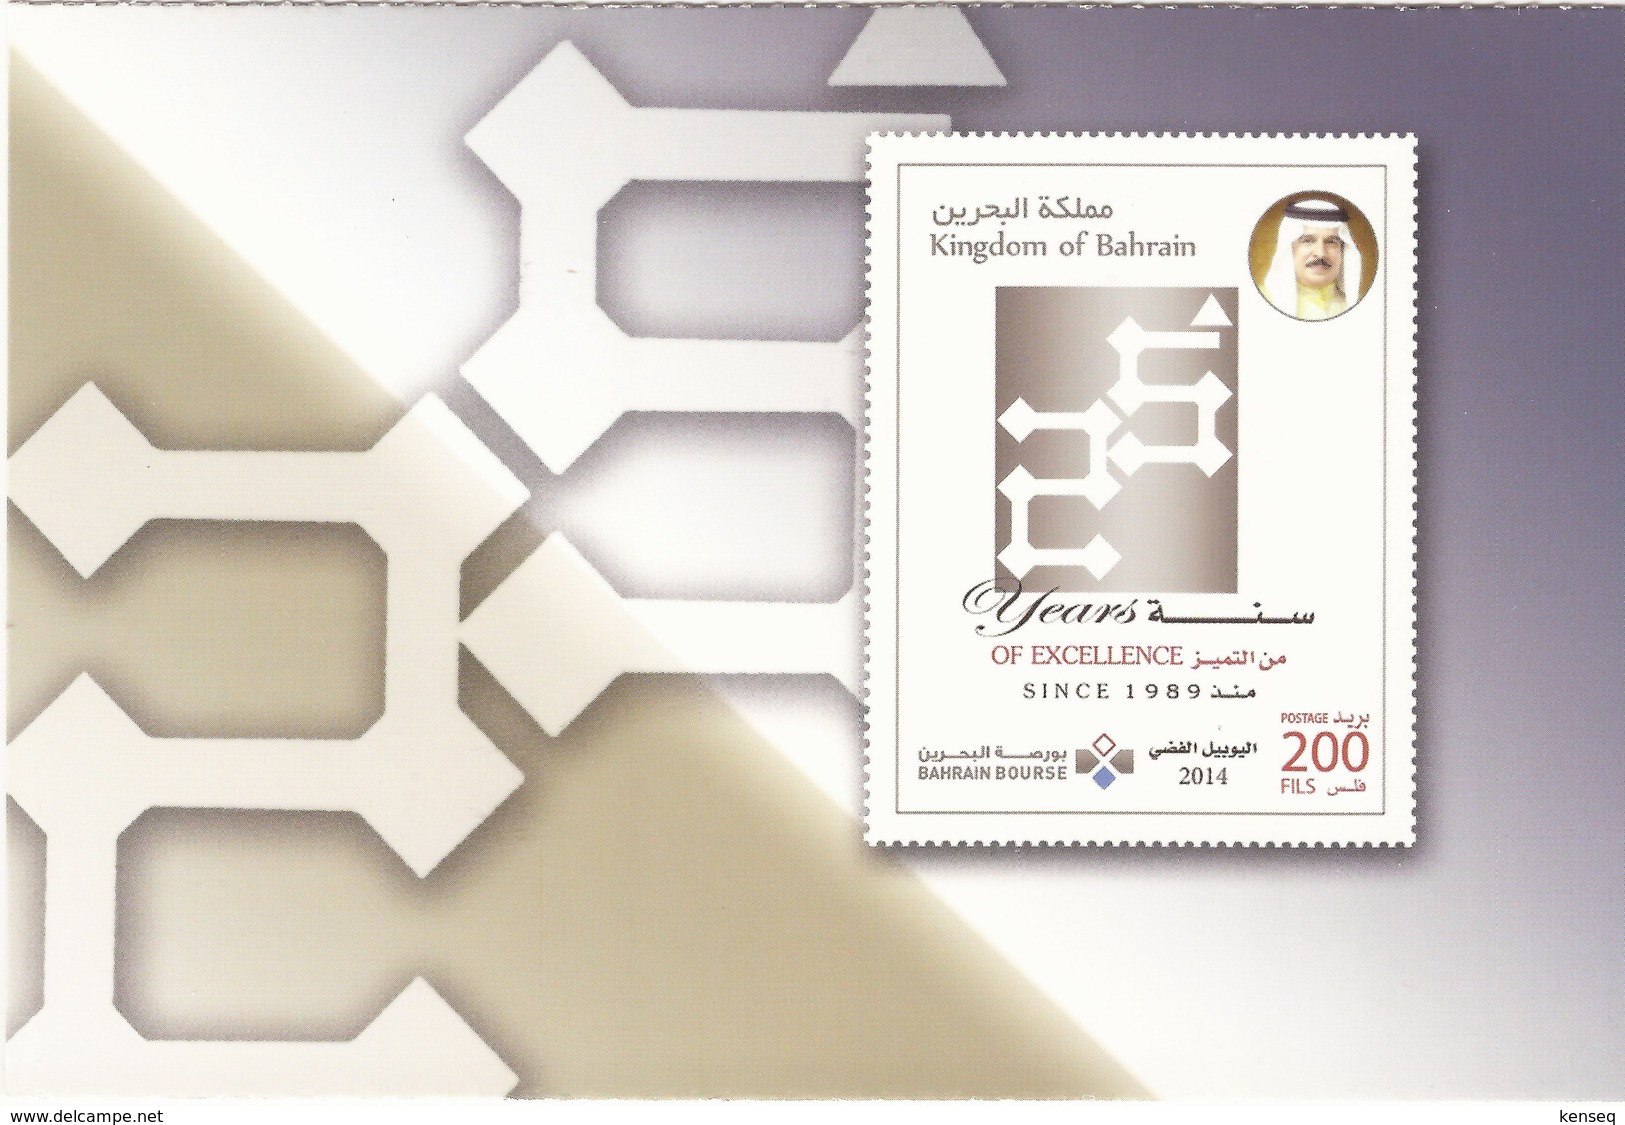 Bahrain 2014 - Bourse 25 Years Of Excellence - Mint Postcard - Bahrein